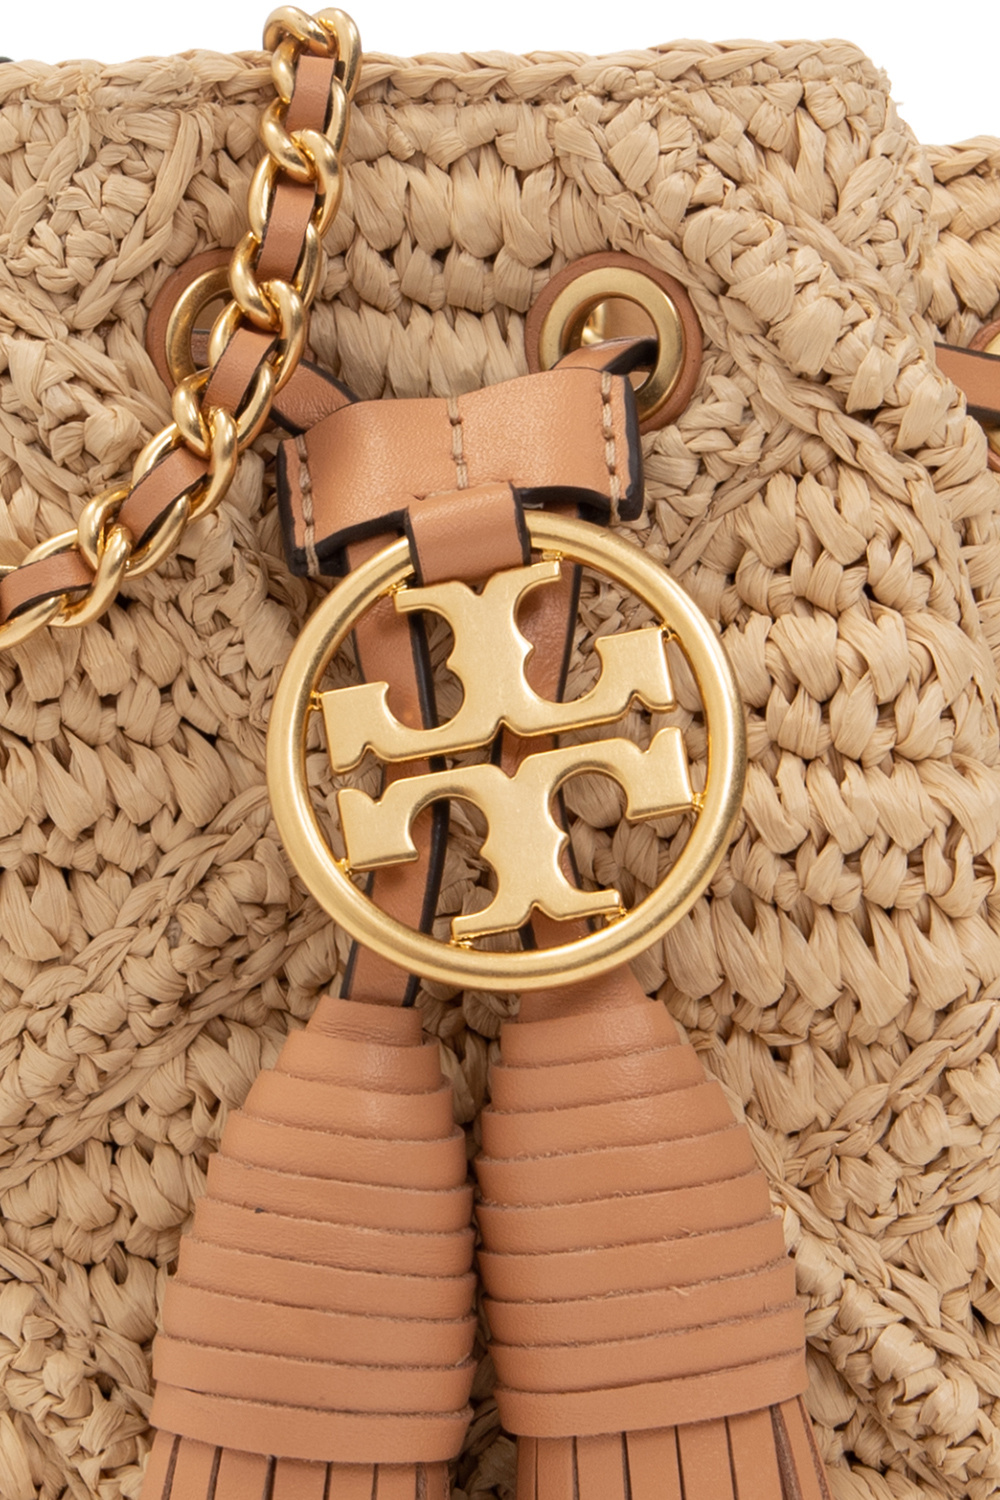 Tory Burch - Fleming for Fall Our new mini bucket bag, in